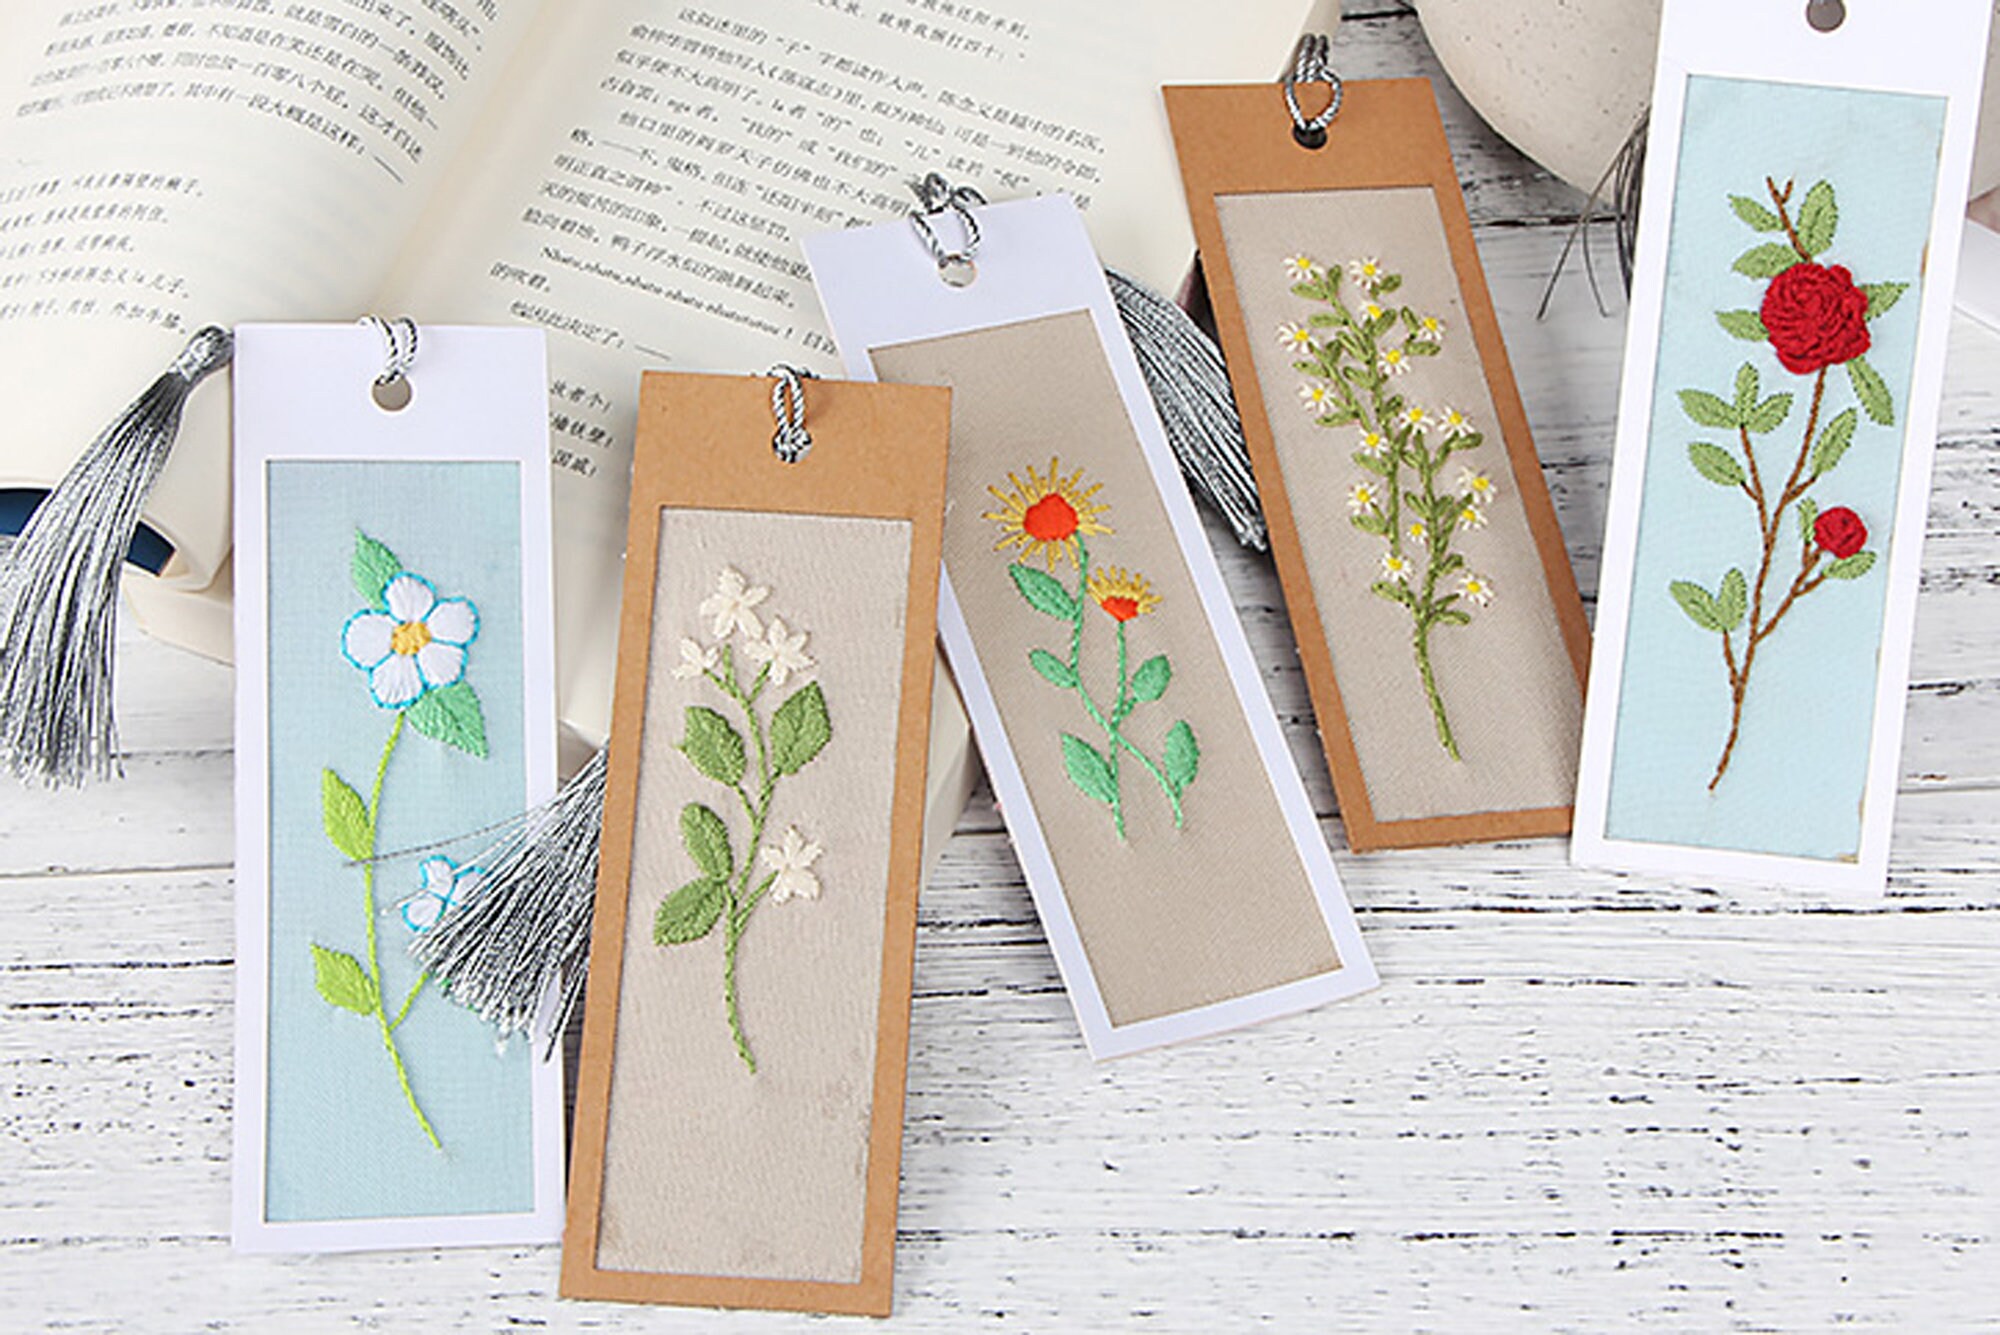 ZuoAnLF Cross Stitch Bookmark Kit 4PCS,DIY Bookmarks Cross Stitch Kits for  Beginners,Stamped Embroidery Bookmark,14CT